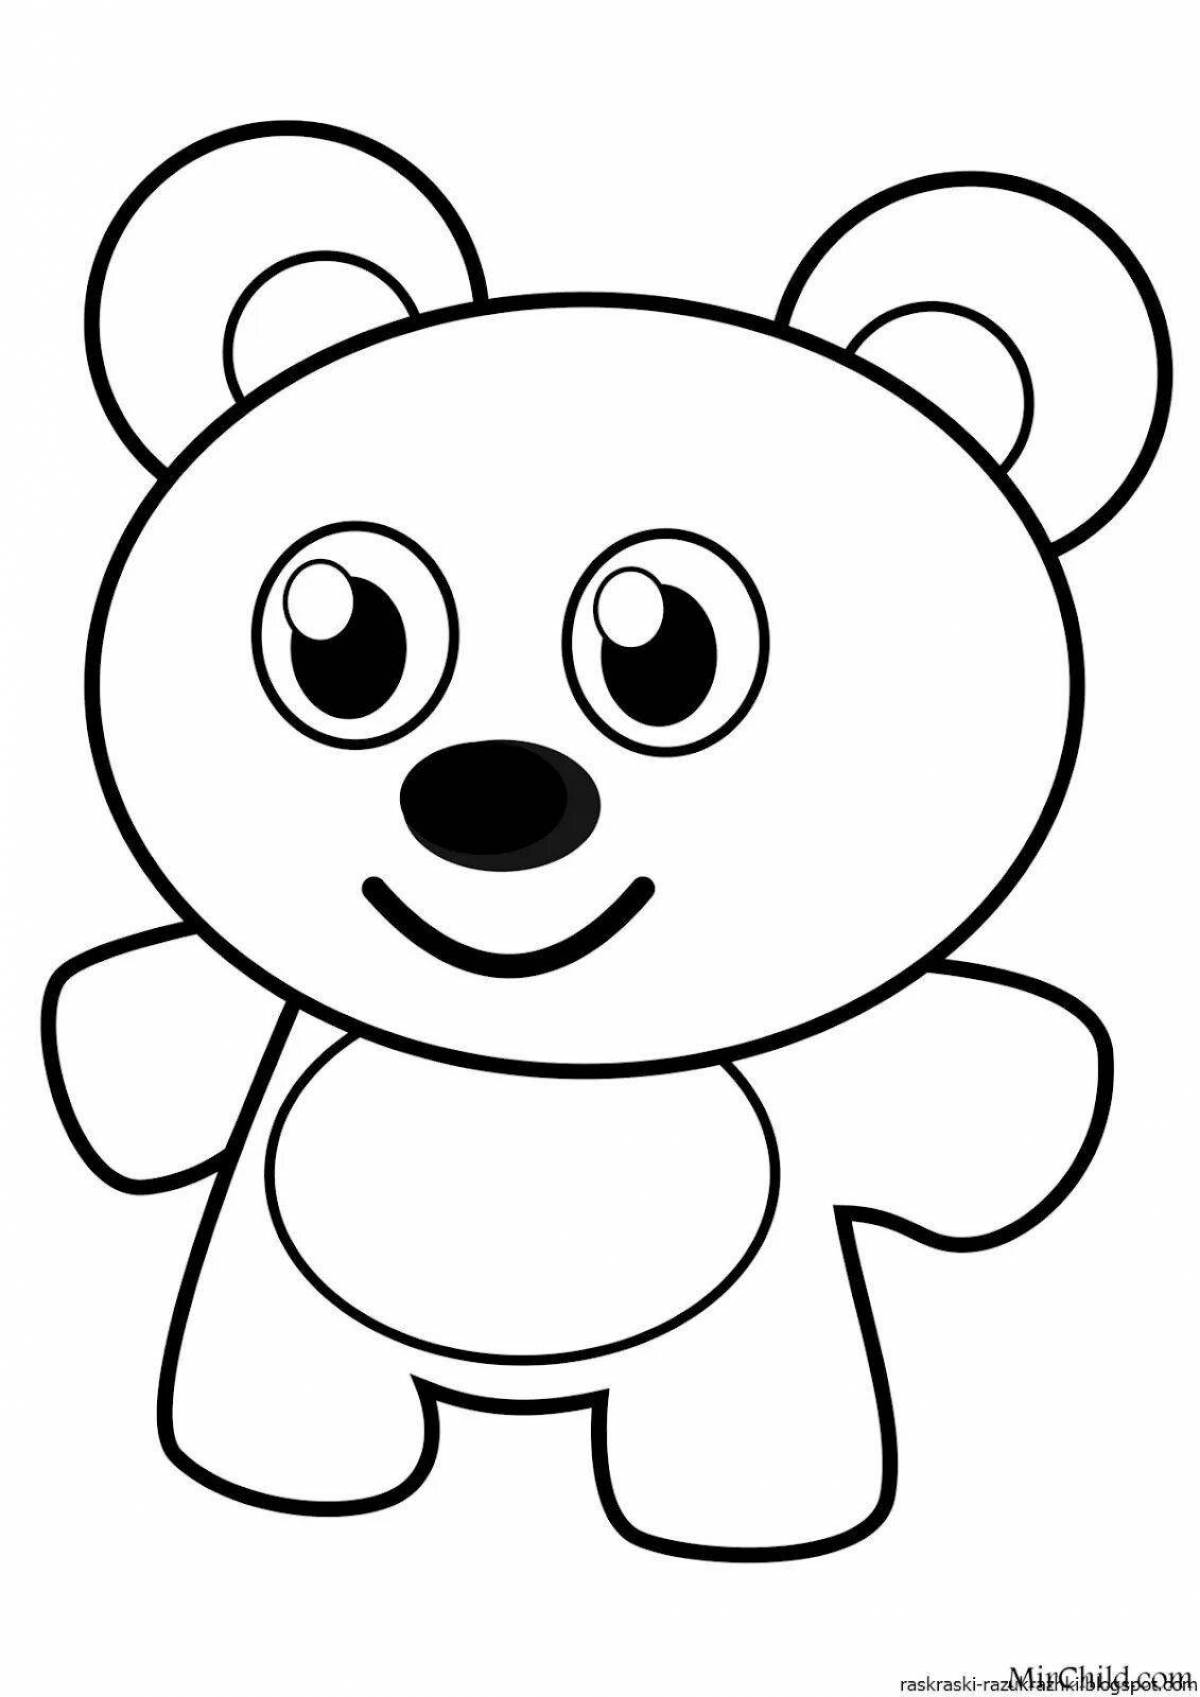 Color-frenzy coloring page for 2 year olds